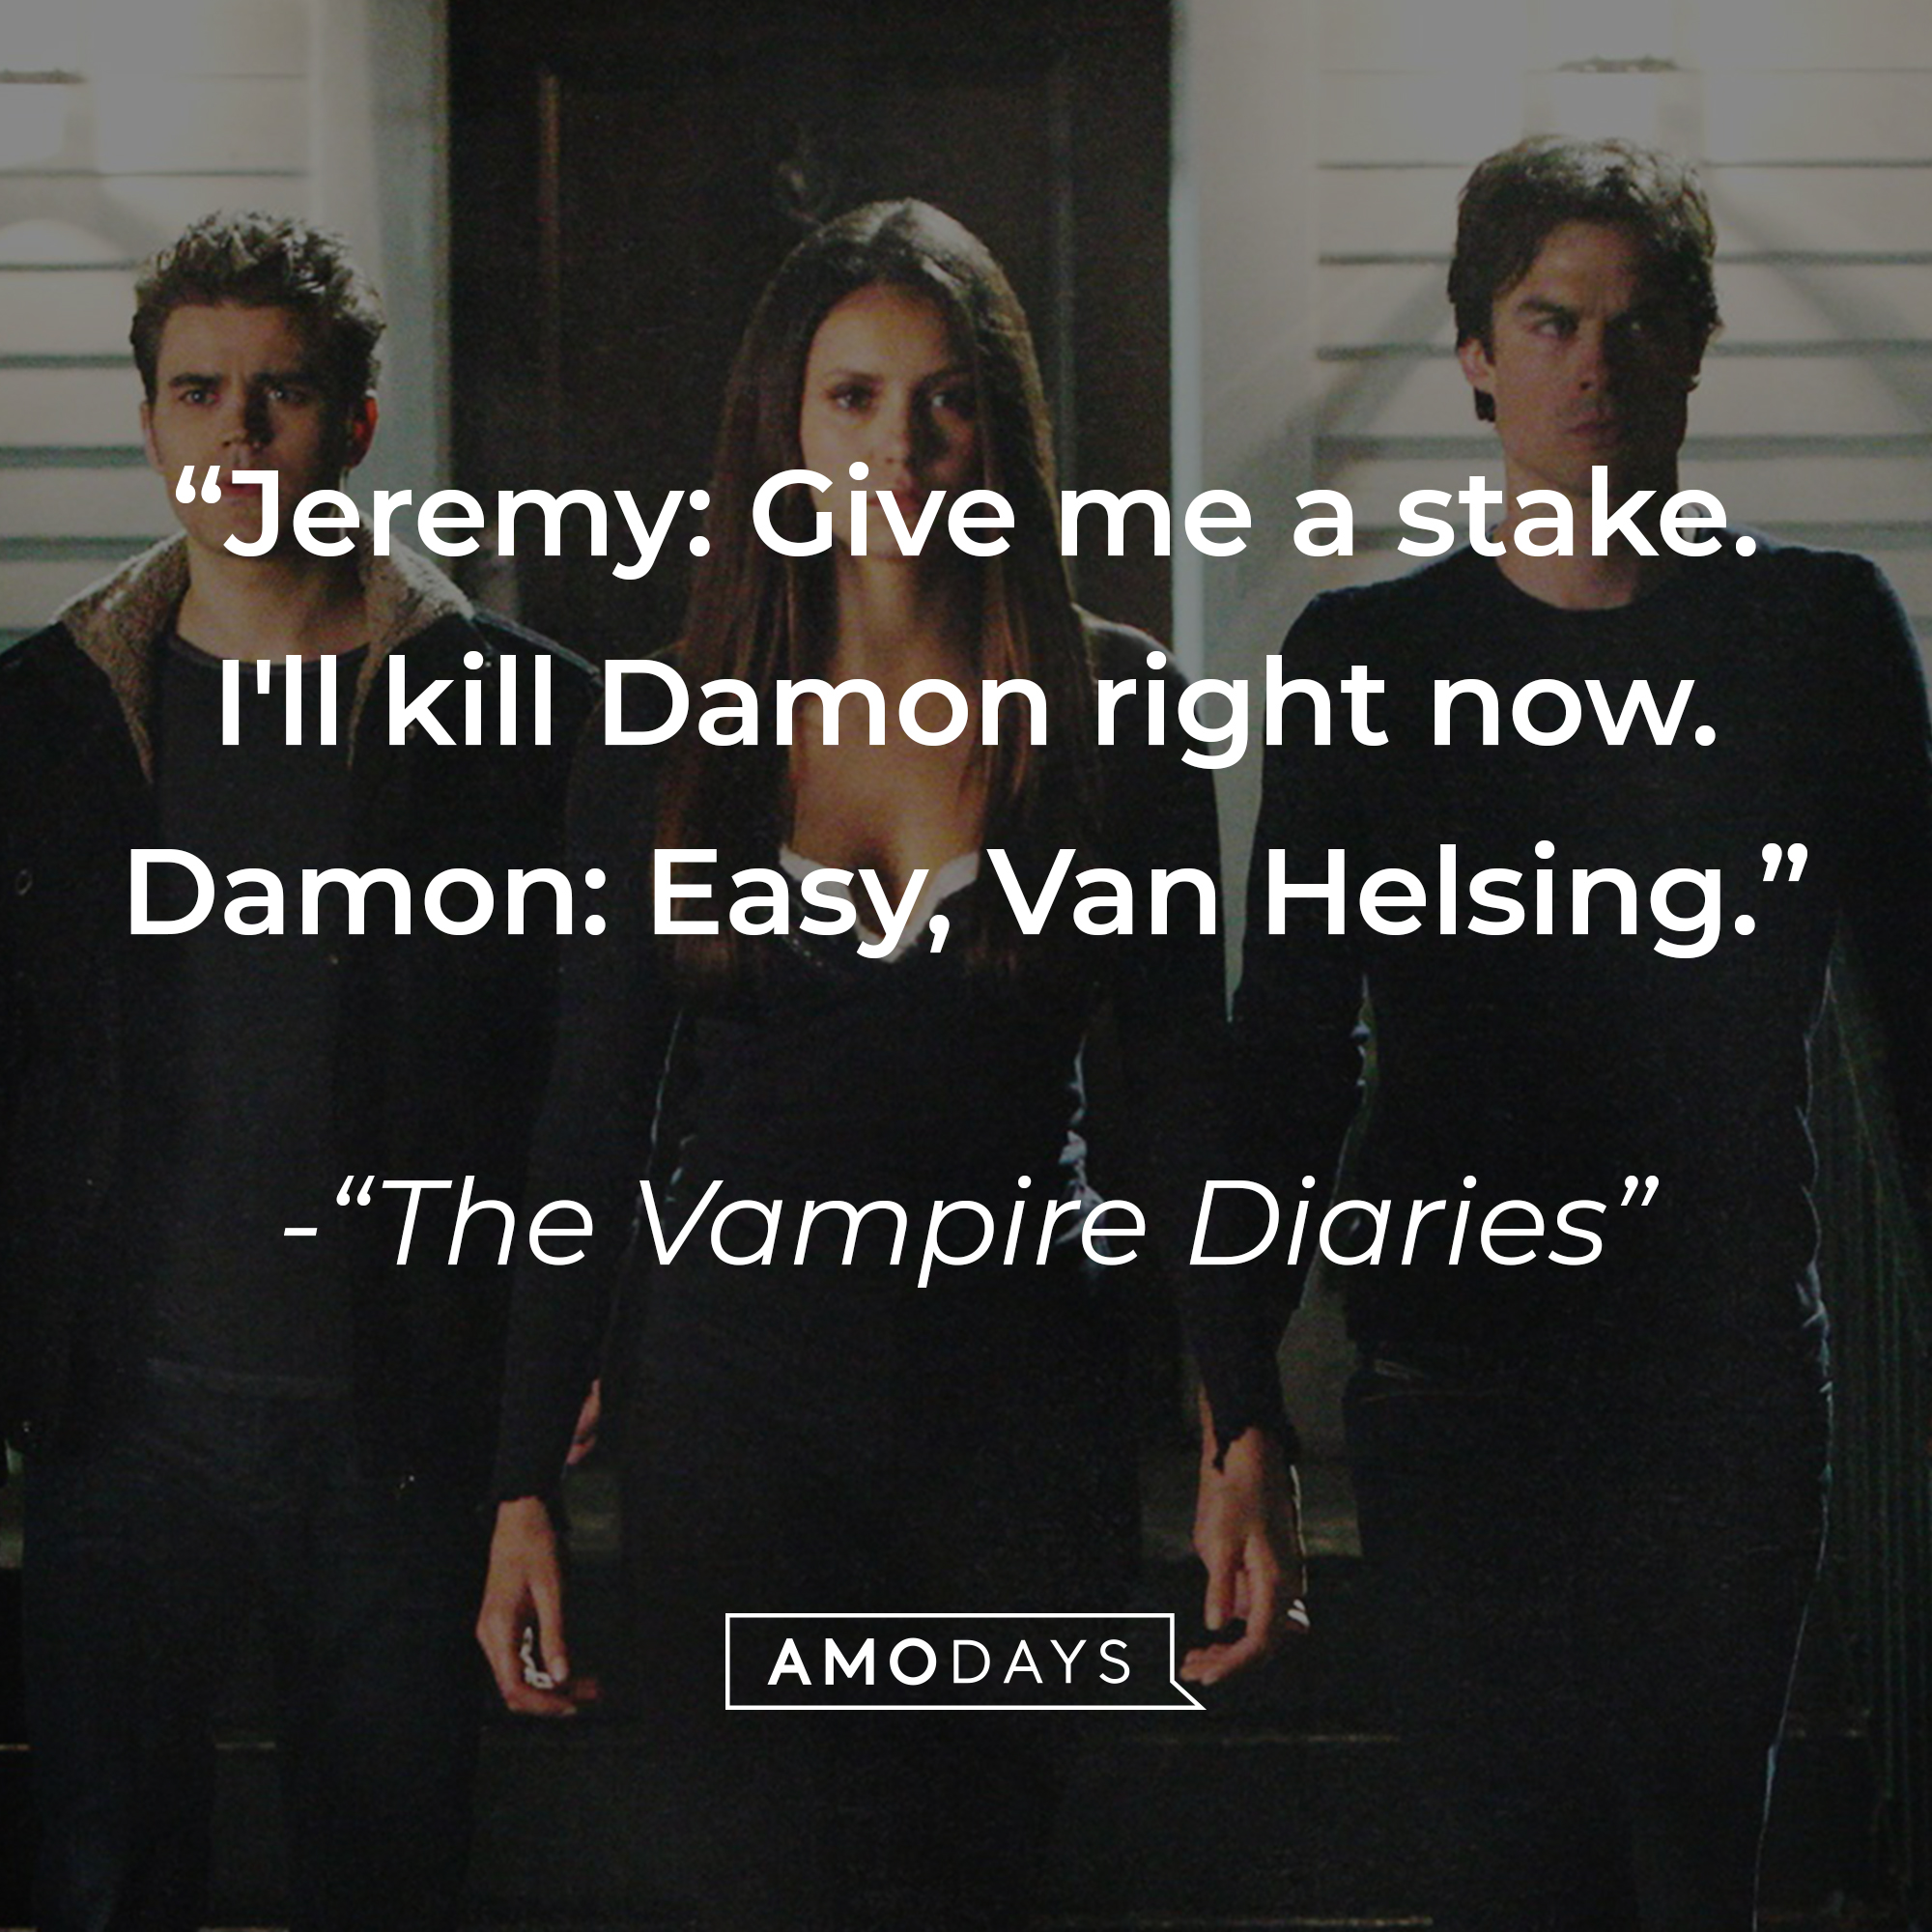 A photo of Damon Salvatore with the quote, "Jeremy: Give me a stake. I'll kill Damon right now. Damon: Easy, Van Helsing." | Source: Facebook/vampirediaries